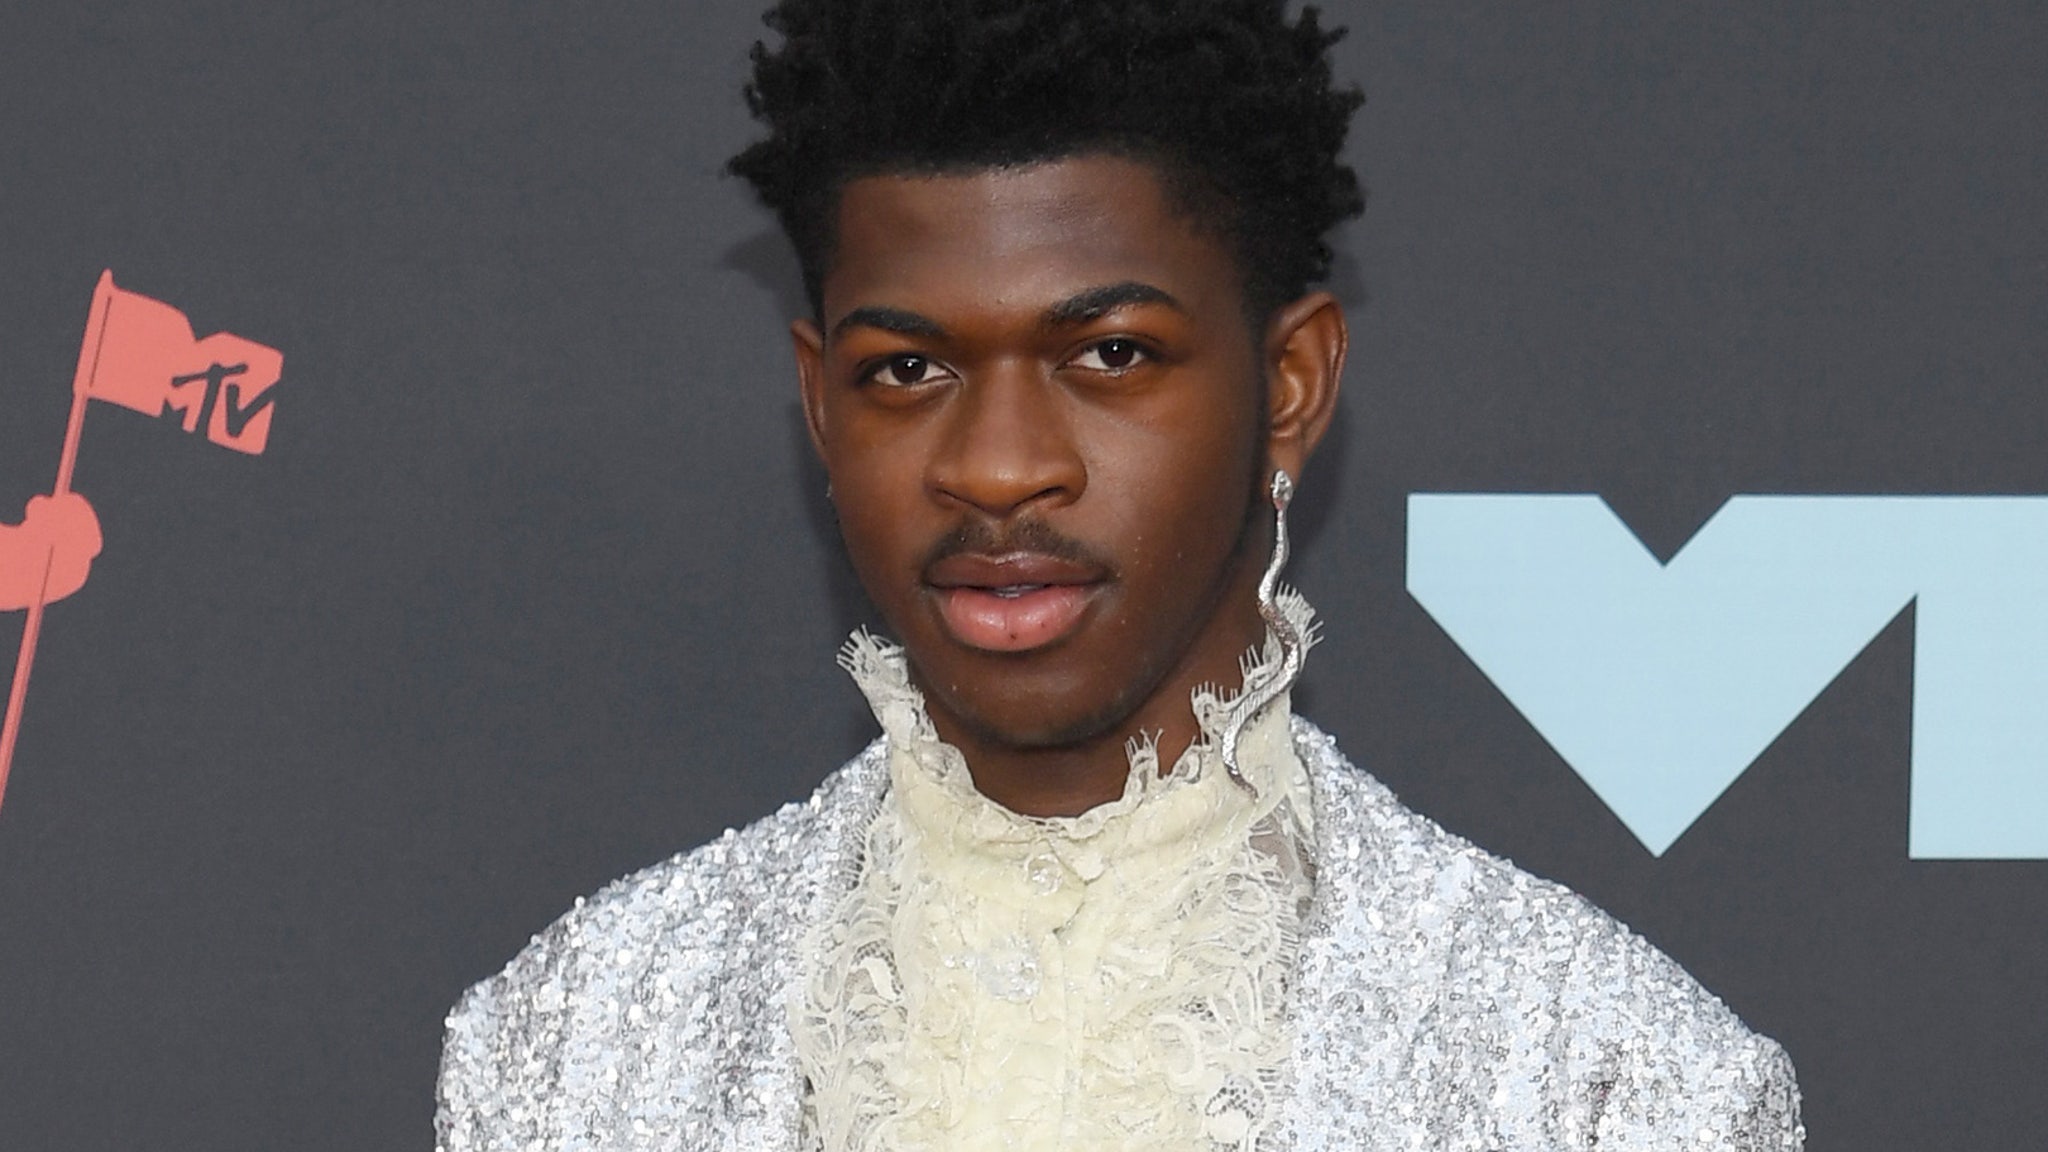 Lil Nas X Is Single Again After Saying 'I Think This Is the One'